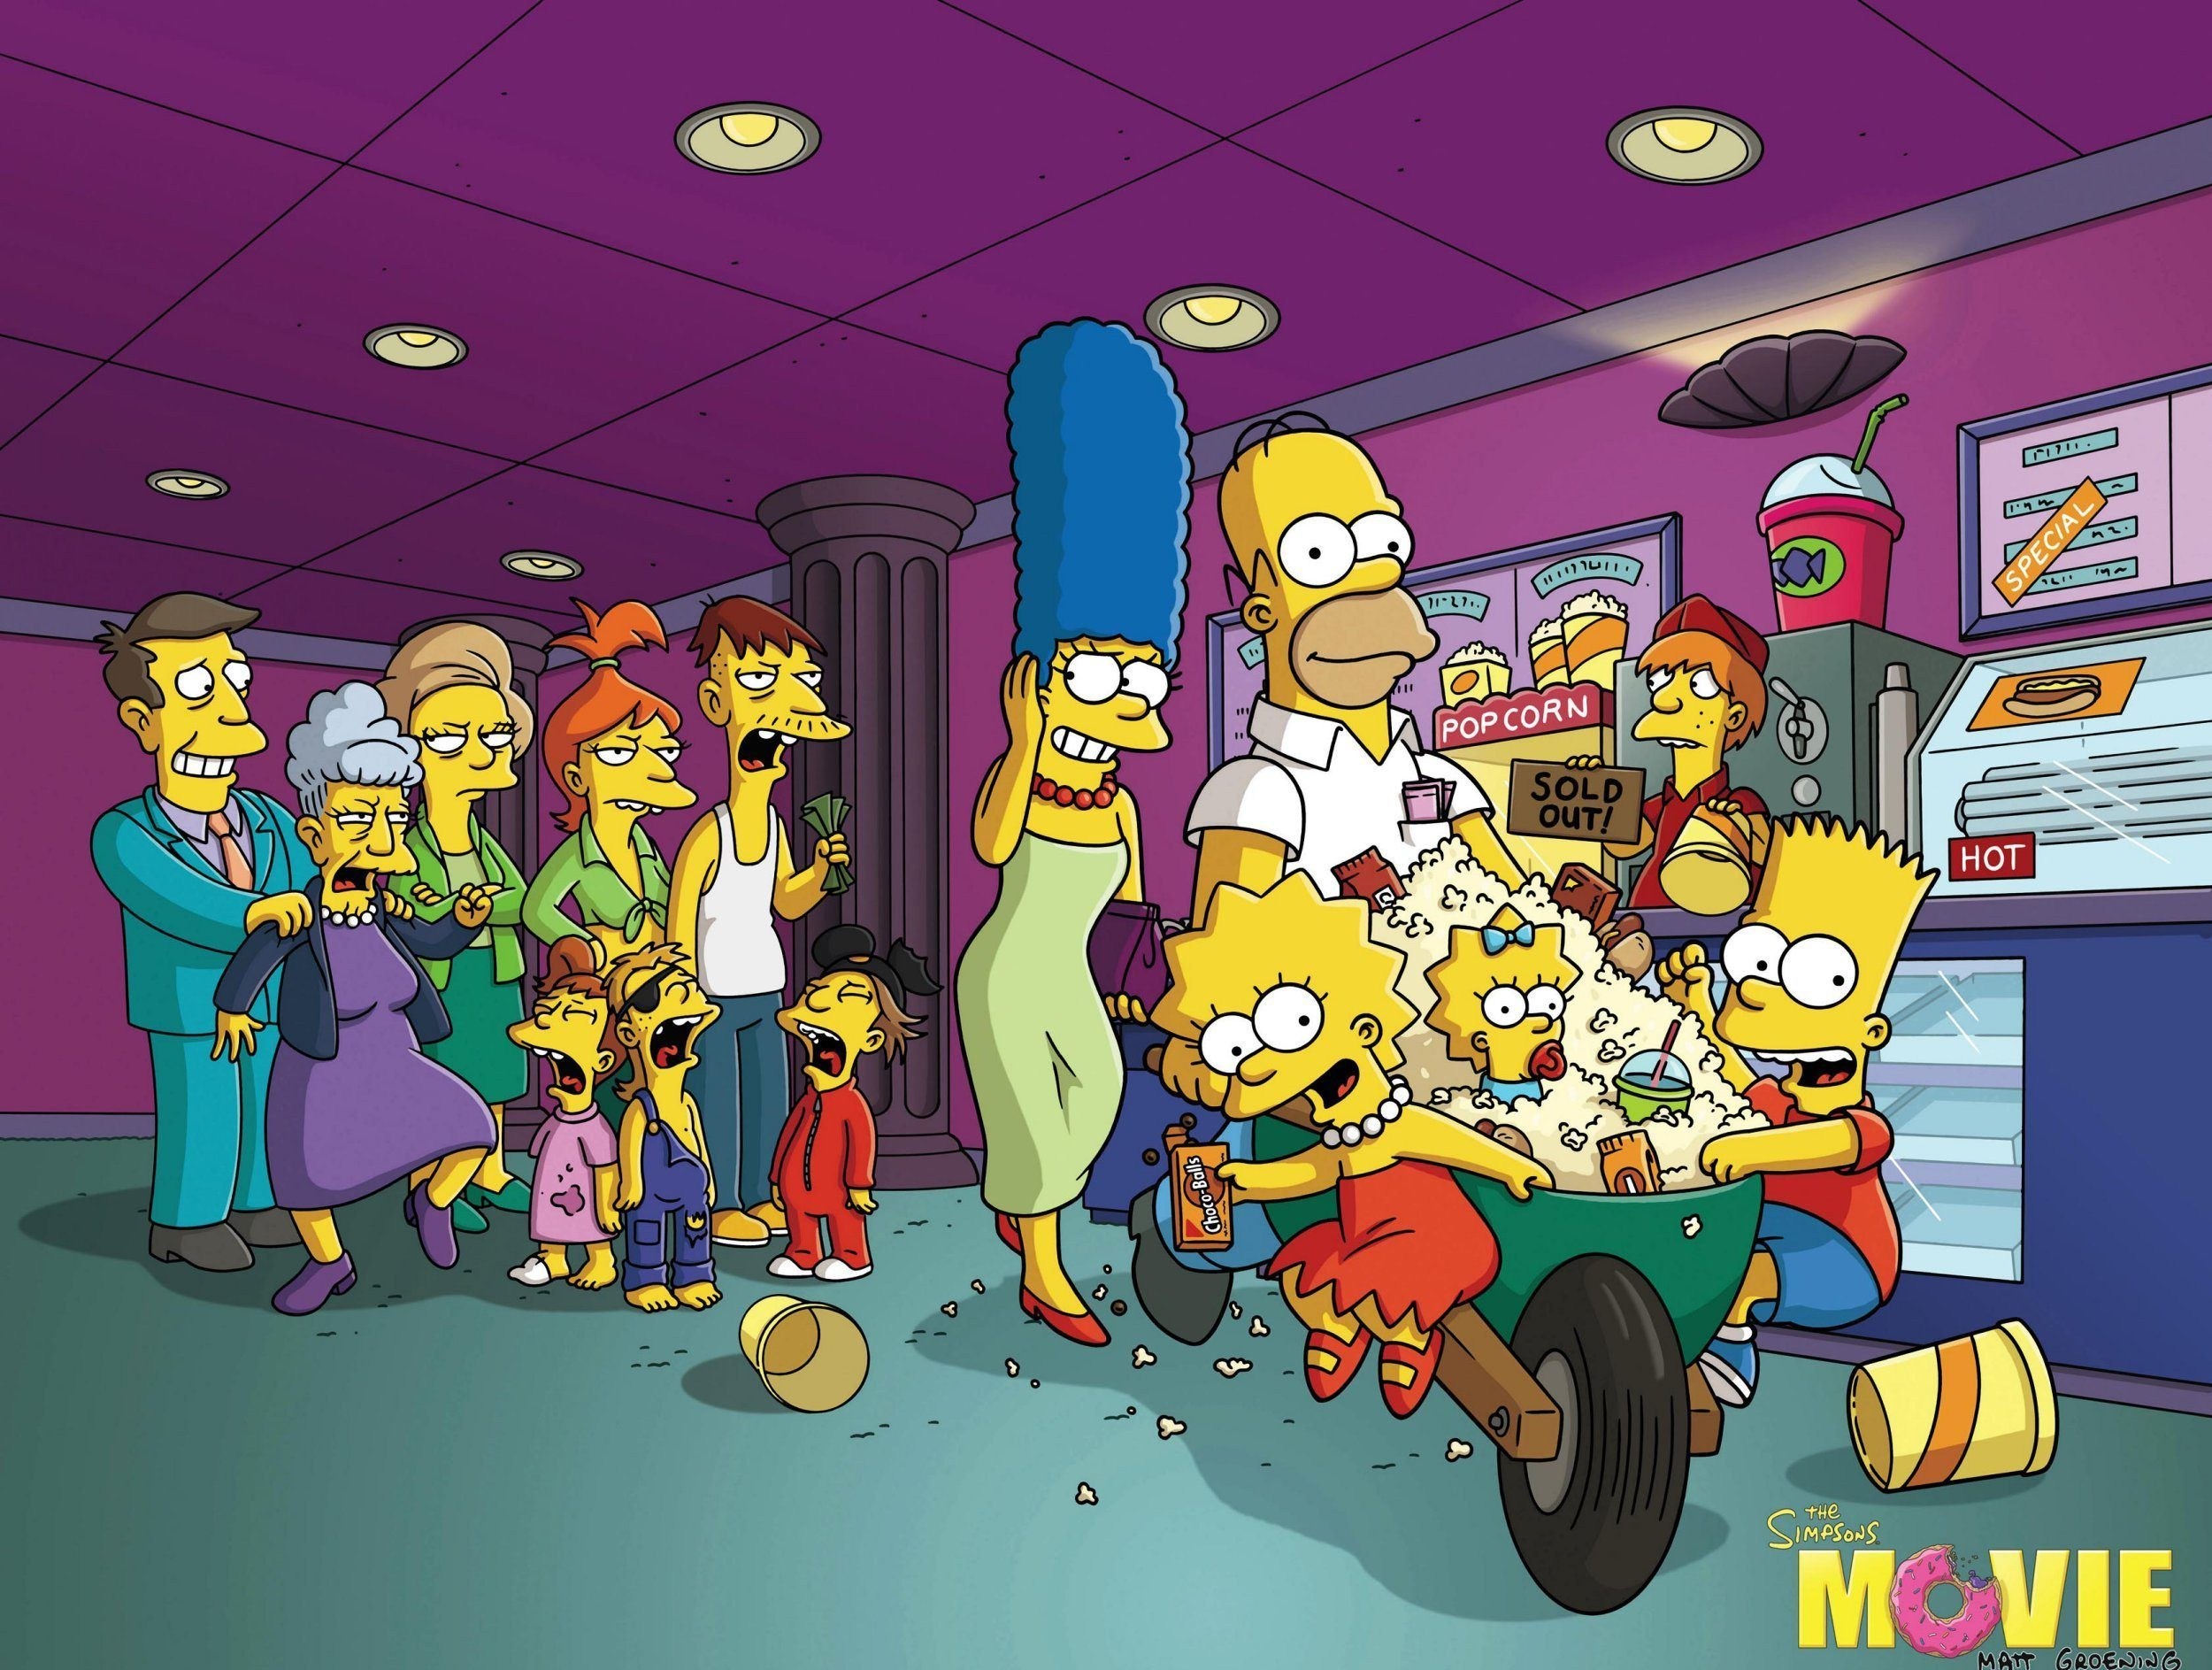 The Simpsons Movie sequel will happen if they have a ‘great story’ but it’s in ‘very early stages’